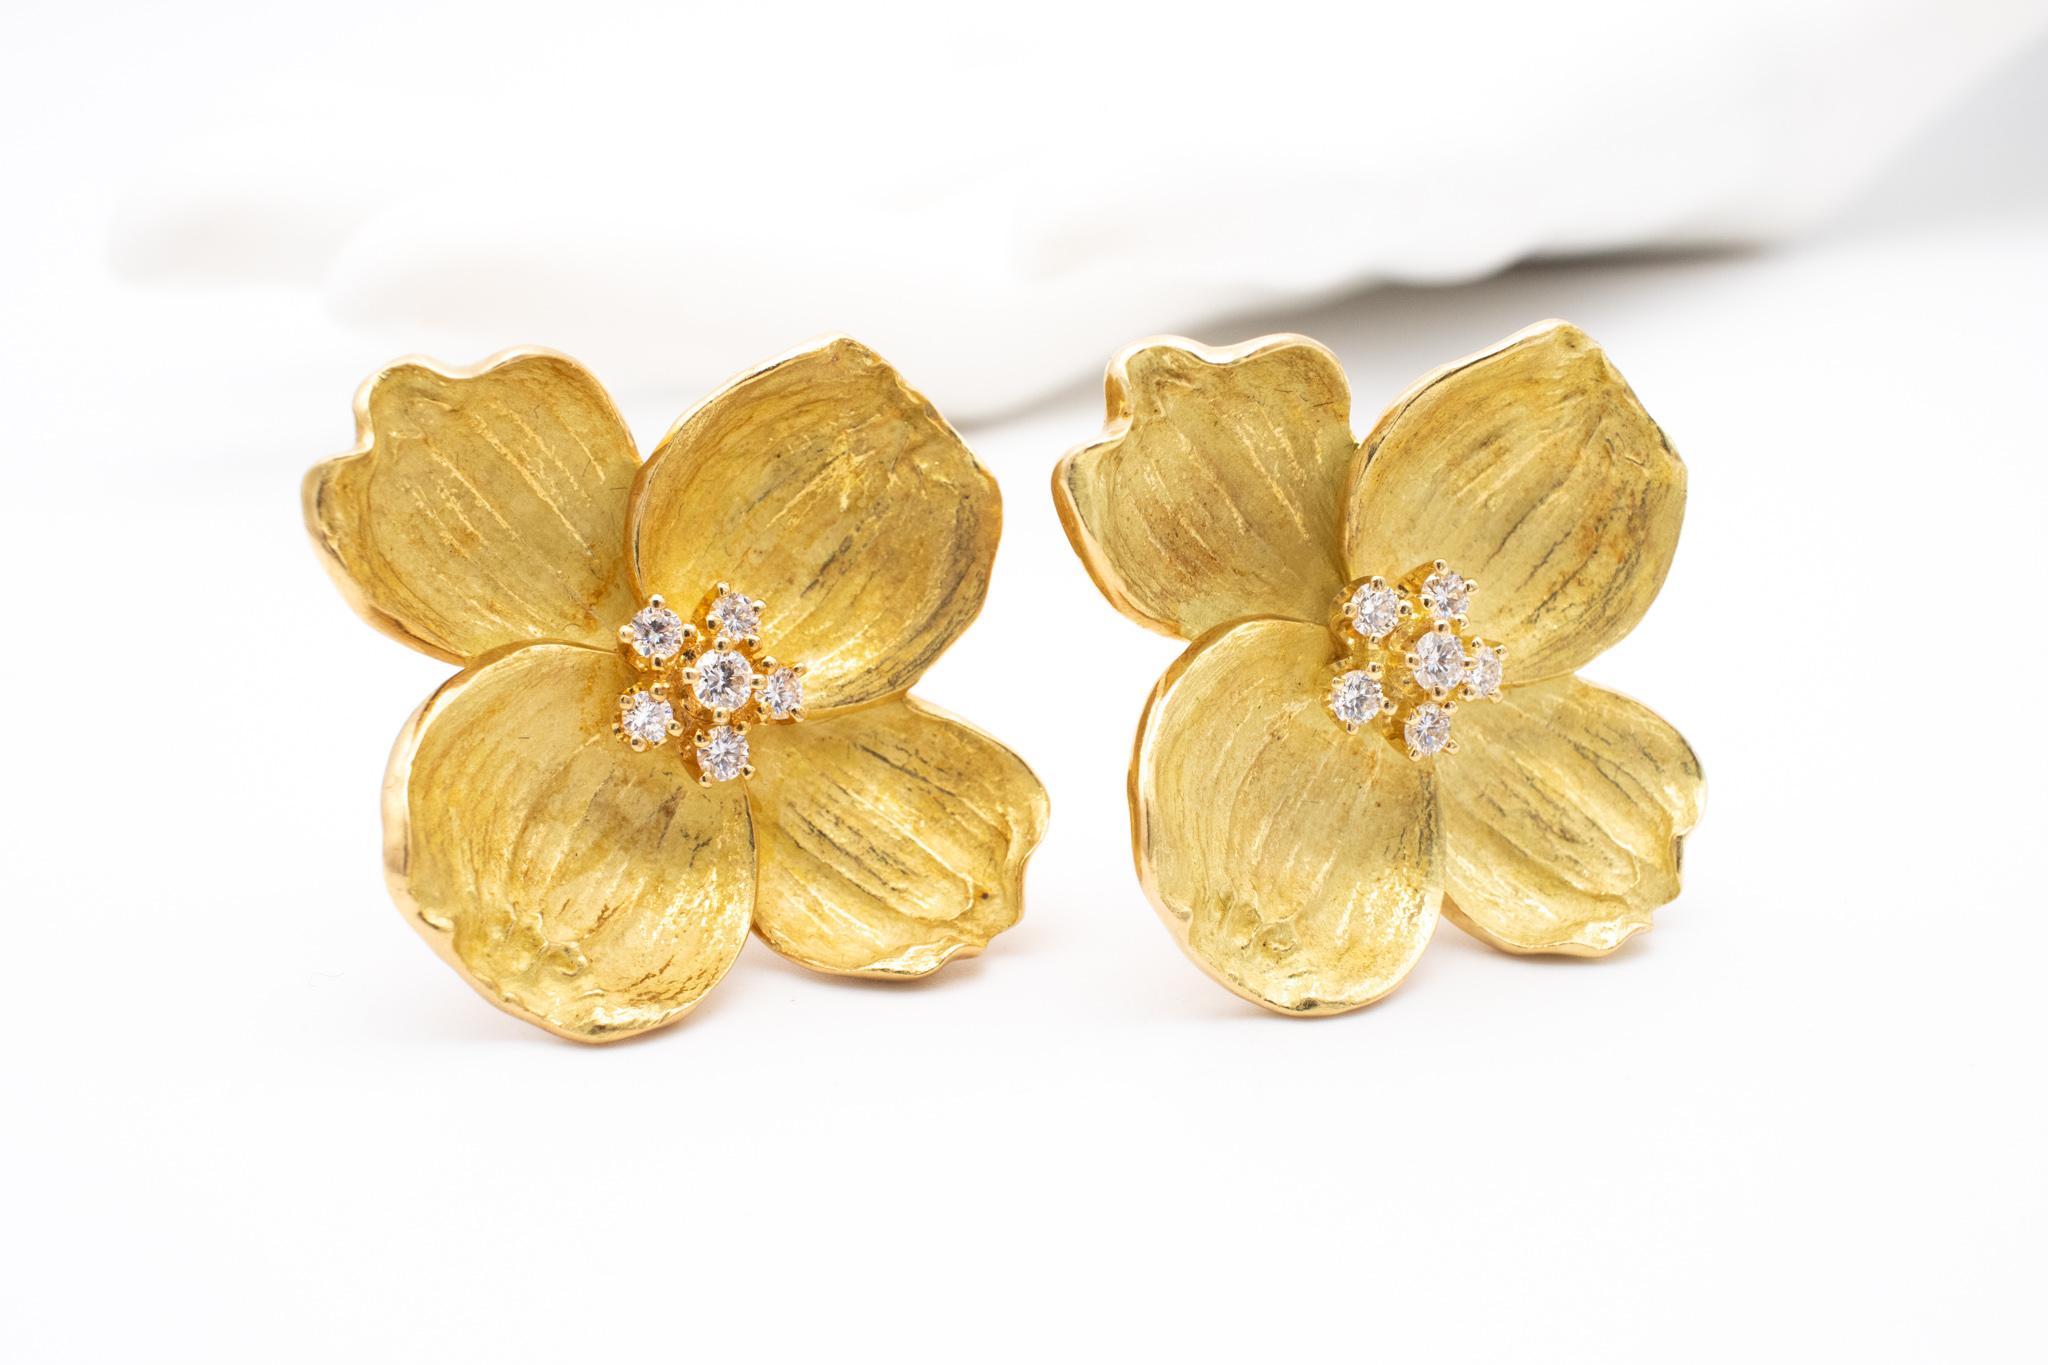 Brilliant Cut Tiffany Co Dogwood Flowers Extra Large Earrings In 18Kt Yellow Gold VS Diamonds